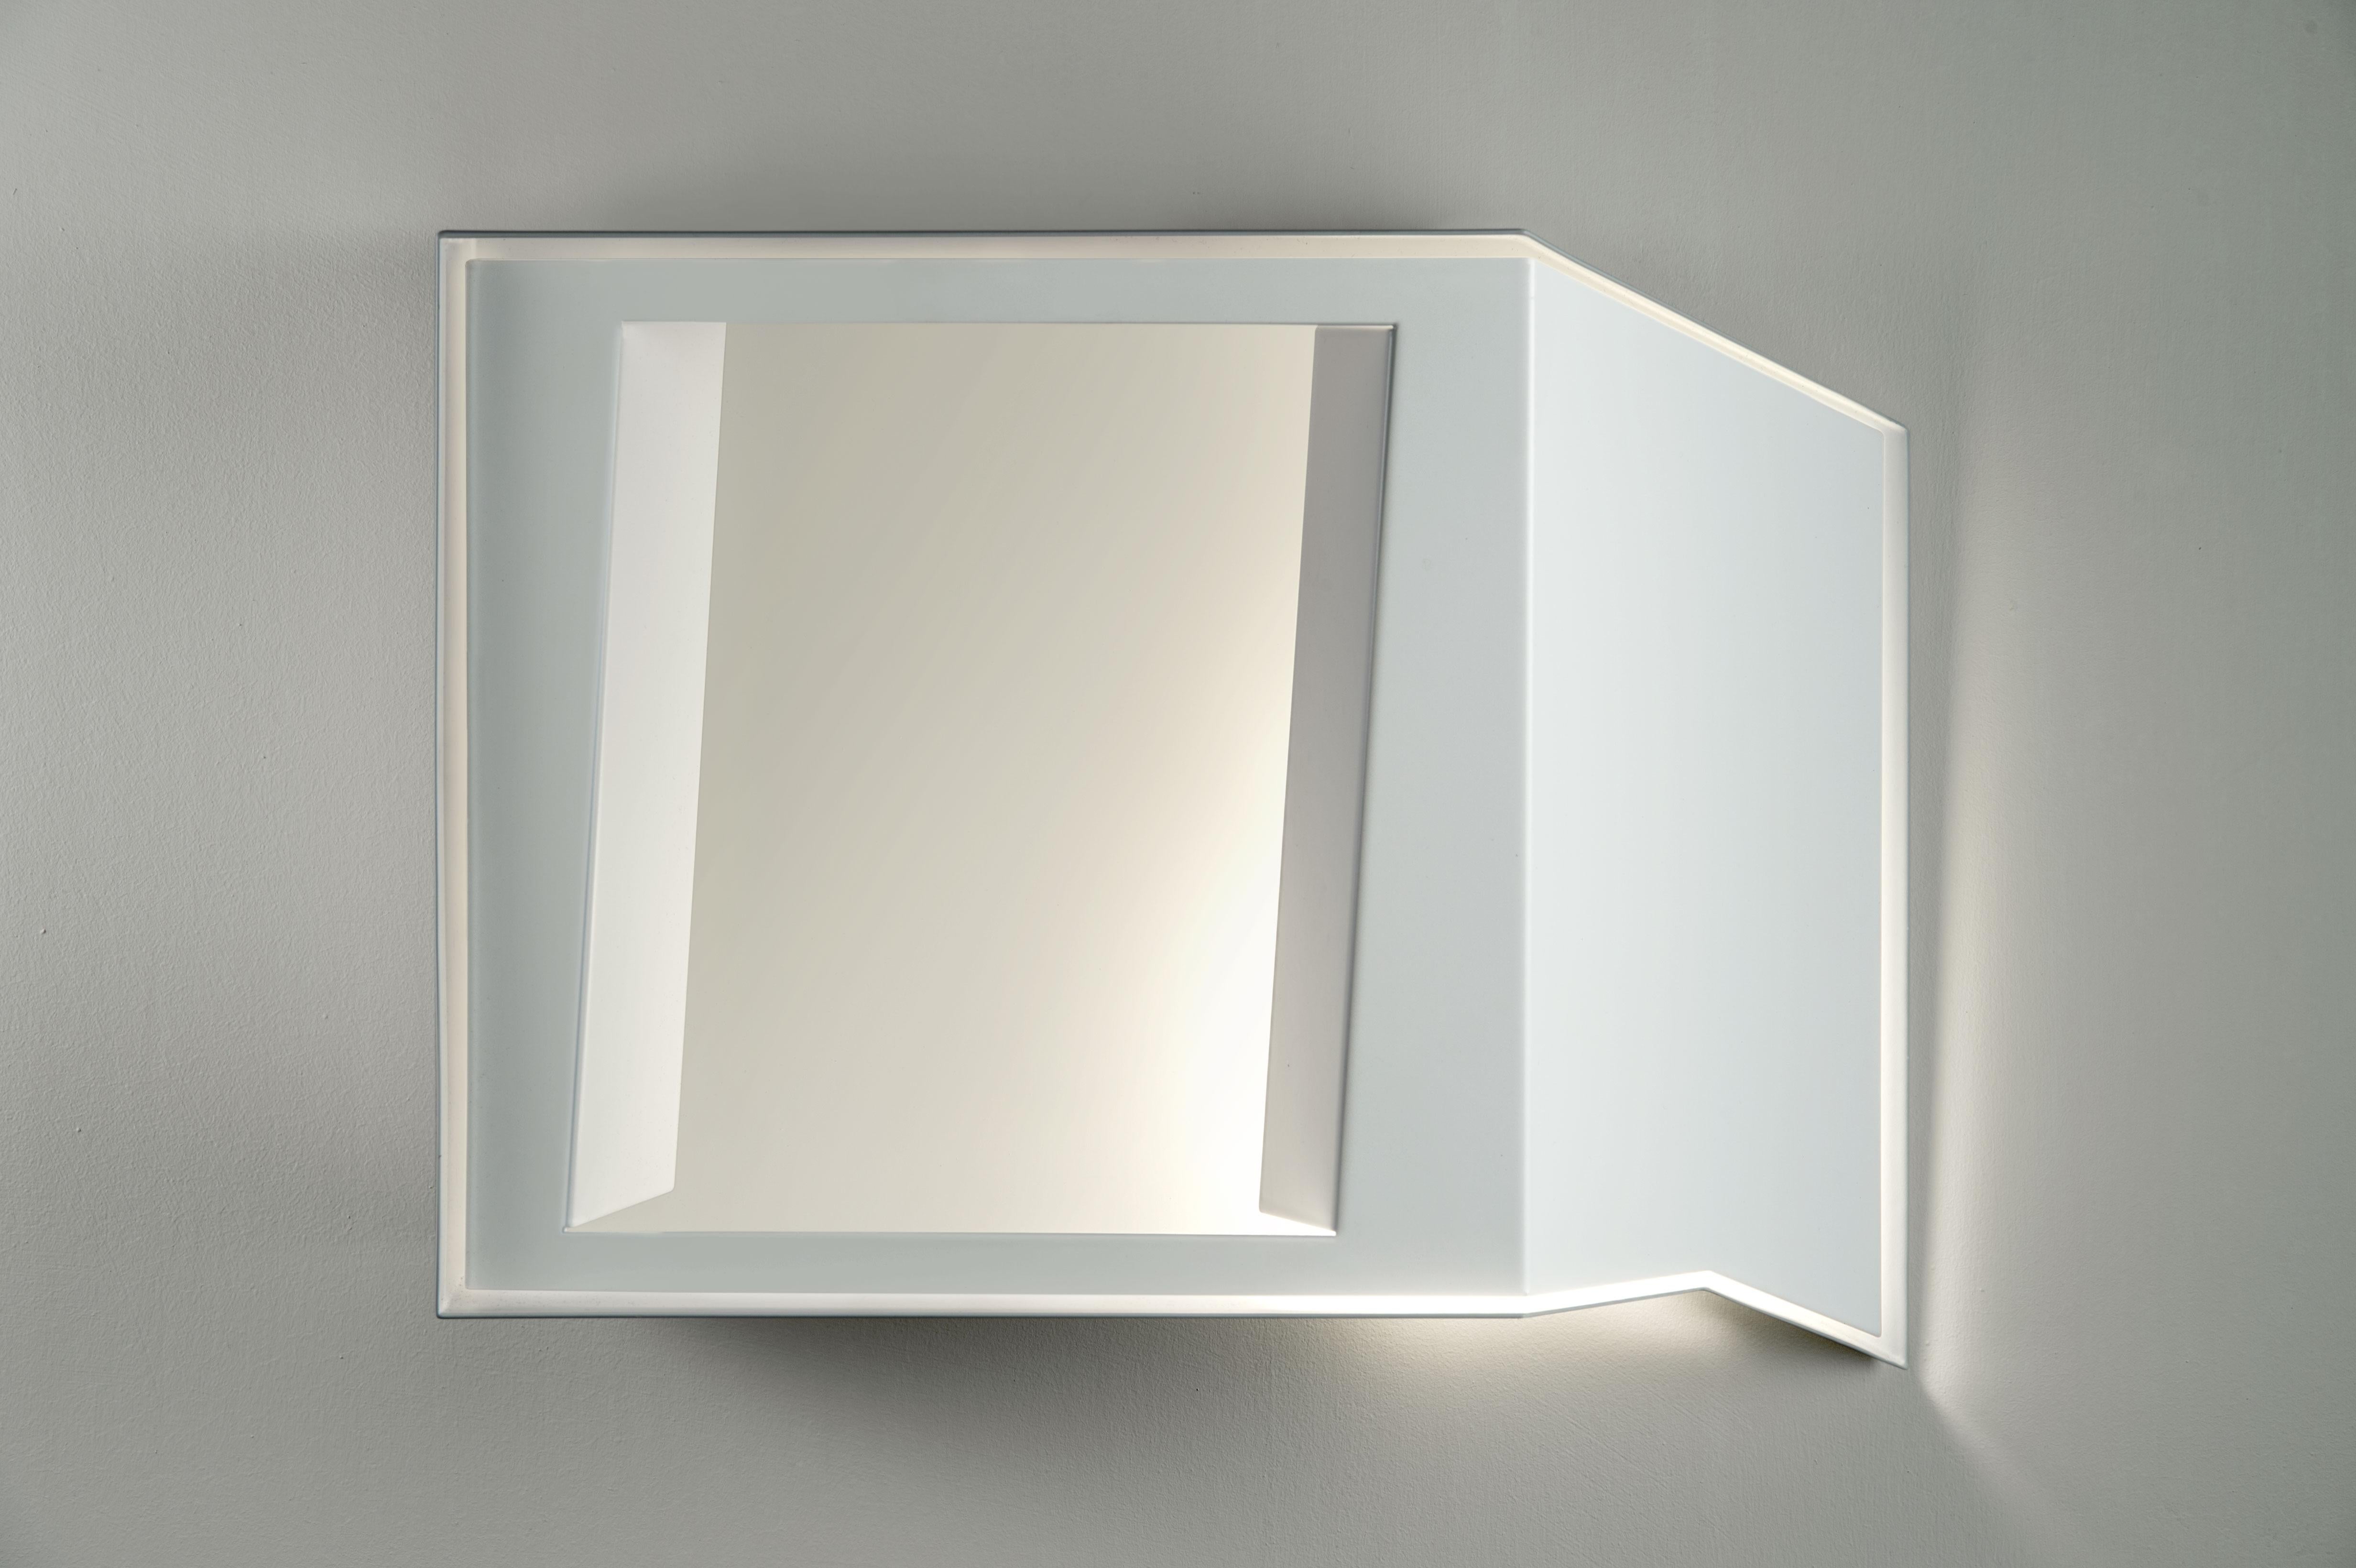 Wall sconce in Limited Edition Italy 2019, modern sculpture of light
Collection Screen of Light Isid30 ovest, designed by architects Stevan and Milena Tesic: an harmonious relation between design and architecture

Isid30 ovest is a wall sculpture